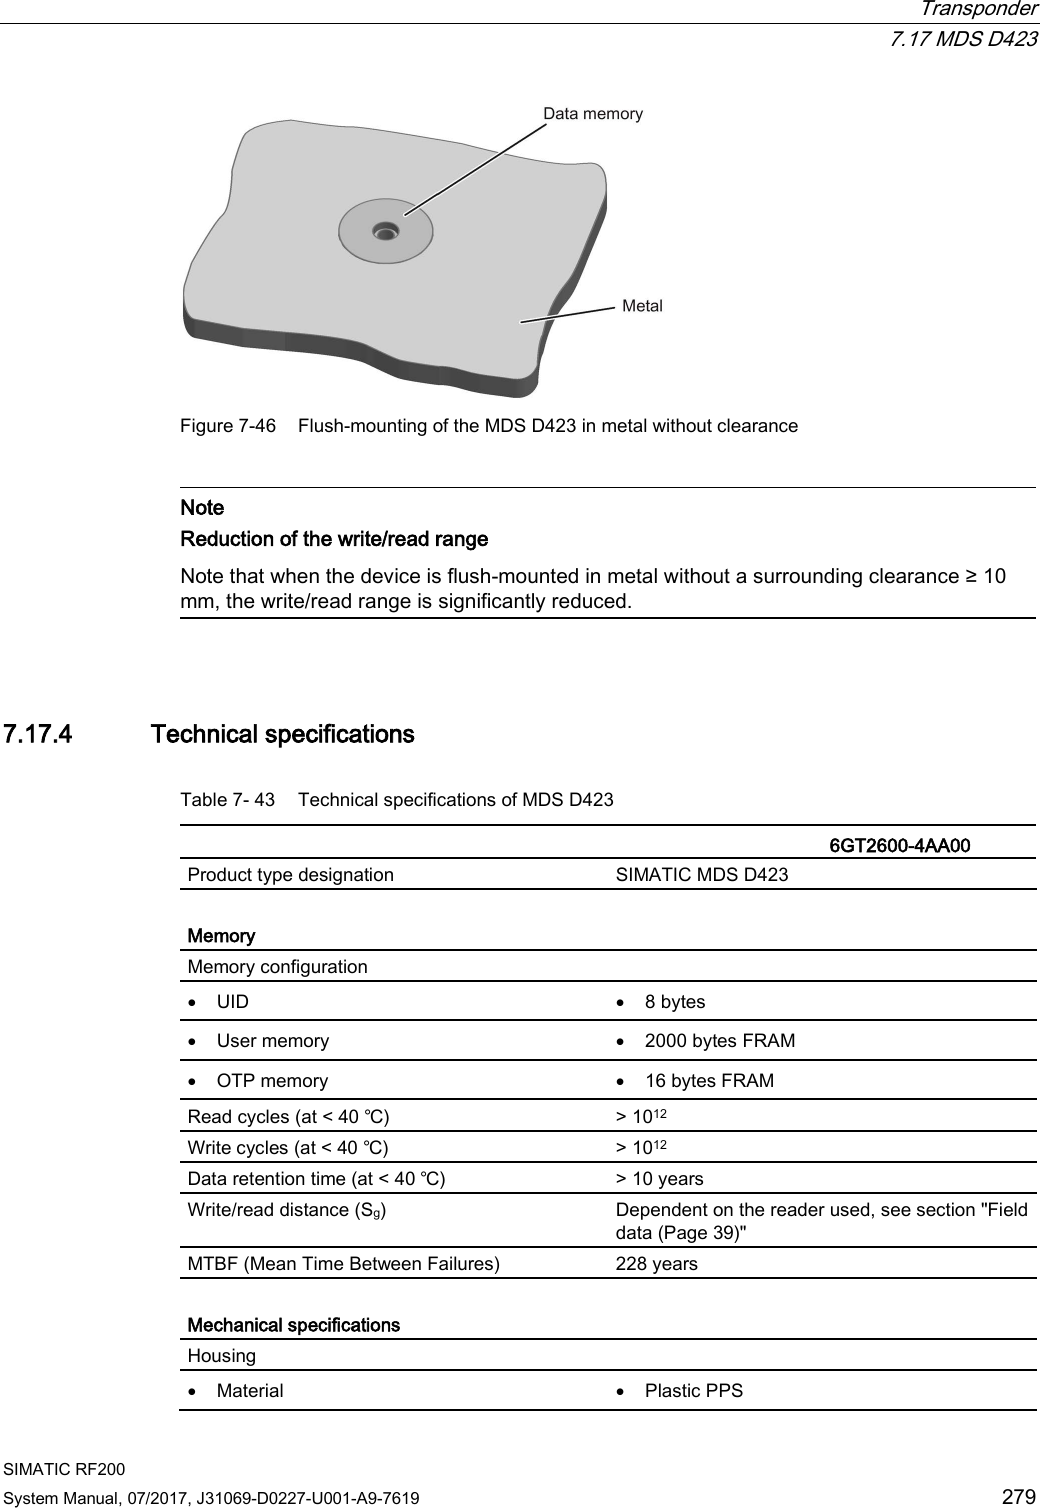  Transponder  7.17 MDS D423 SIMATIC RF200 System Manual, 07/2017, J31069-D0227-U001-A9-7619 279  Figure 7-46 Flush-mounting of the MDS D423 in metal without clearance   Note Reduction of the write/read range  Note that when the device is flush-mounted in metal without a surrounding clearance ≥ 10 mm, the write/read range is significantly reduced.  7.17.4 Technical specifications Table 7- 43 Technical specifications of MDS D423    6GT2600-4AA00 Product type designation SIMATIC MDS D423  Memory Memory configuration  • UID • 8 bytes • User memory • 2000 bytes FRAM • OTP memory • 16 bytes FRAM Read cycles (at &lt; 40 ℃) &gt; 1012 Write cycles (at &lt; 40 ℃) &gt; 1012 Data retention time (at &lt; 40 ℃) &gt; 10 years Write/read distance (Sg)  Dependent on the reader used, see section &quot;Field data (Page 39)&quot; MTBF (Mean Time Between Failures) 228 years  Mechanical specifications Housing  • Material • Plastic PPS 